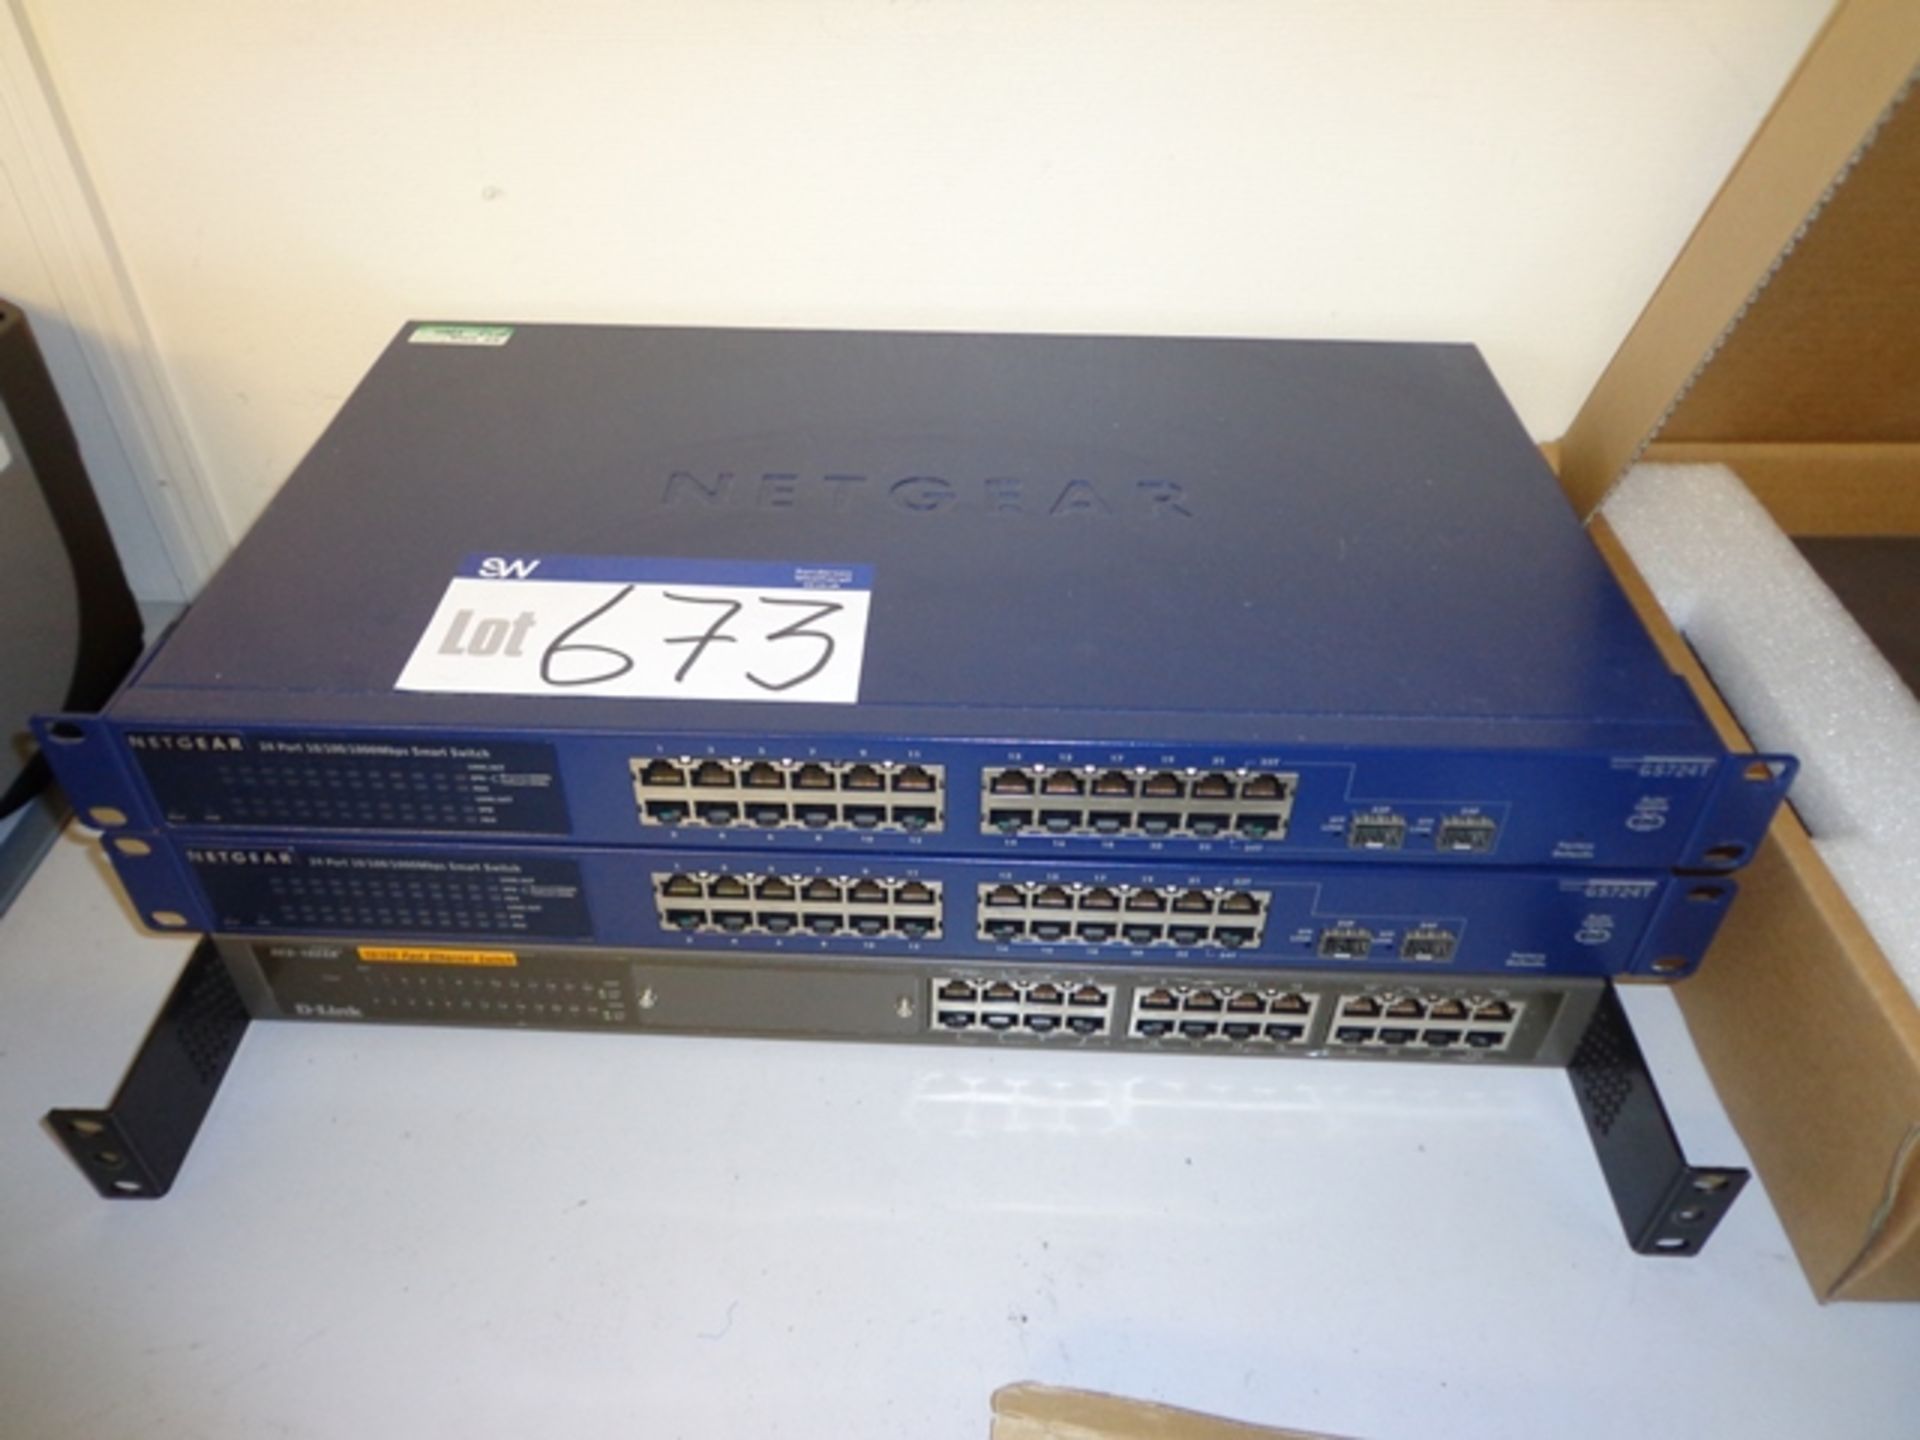 2 Netgear GS724T 24 Port Smart Switches and 1 D-Link DES-1024R Fast Ethernet Switch